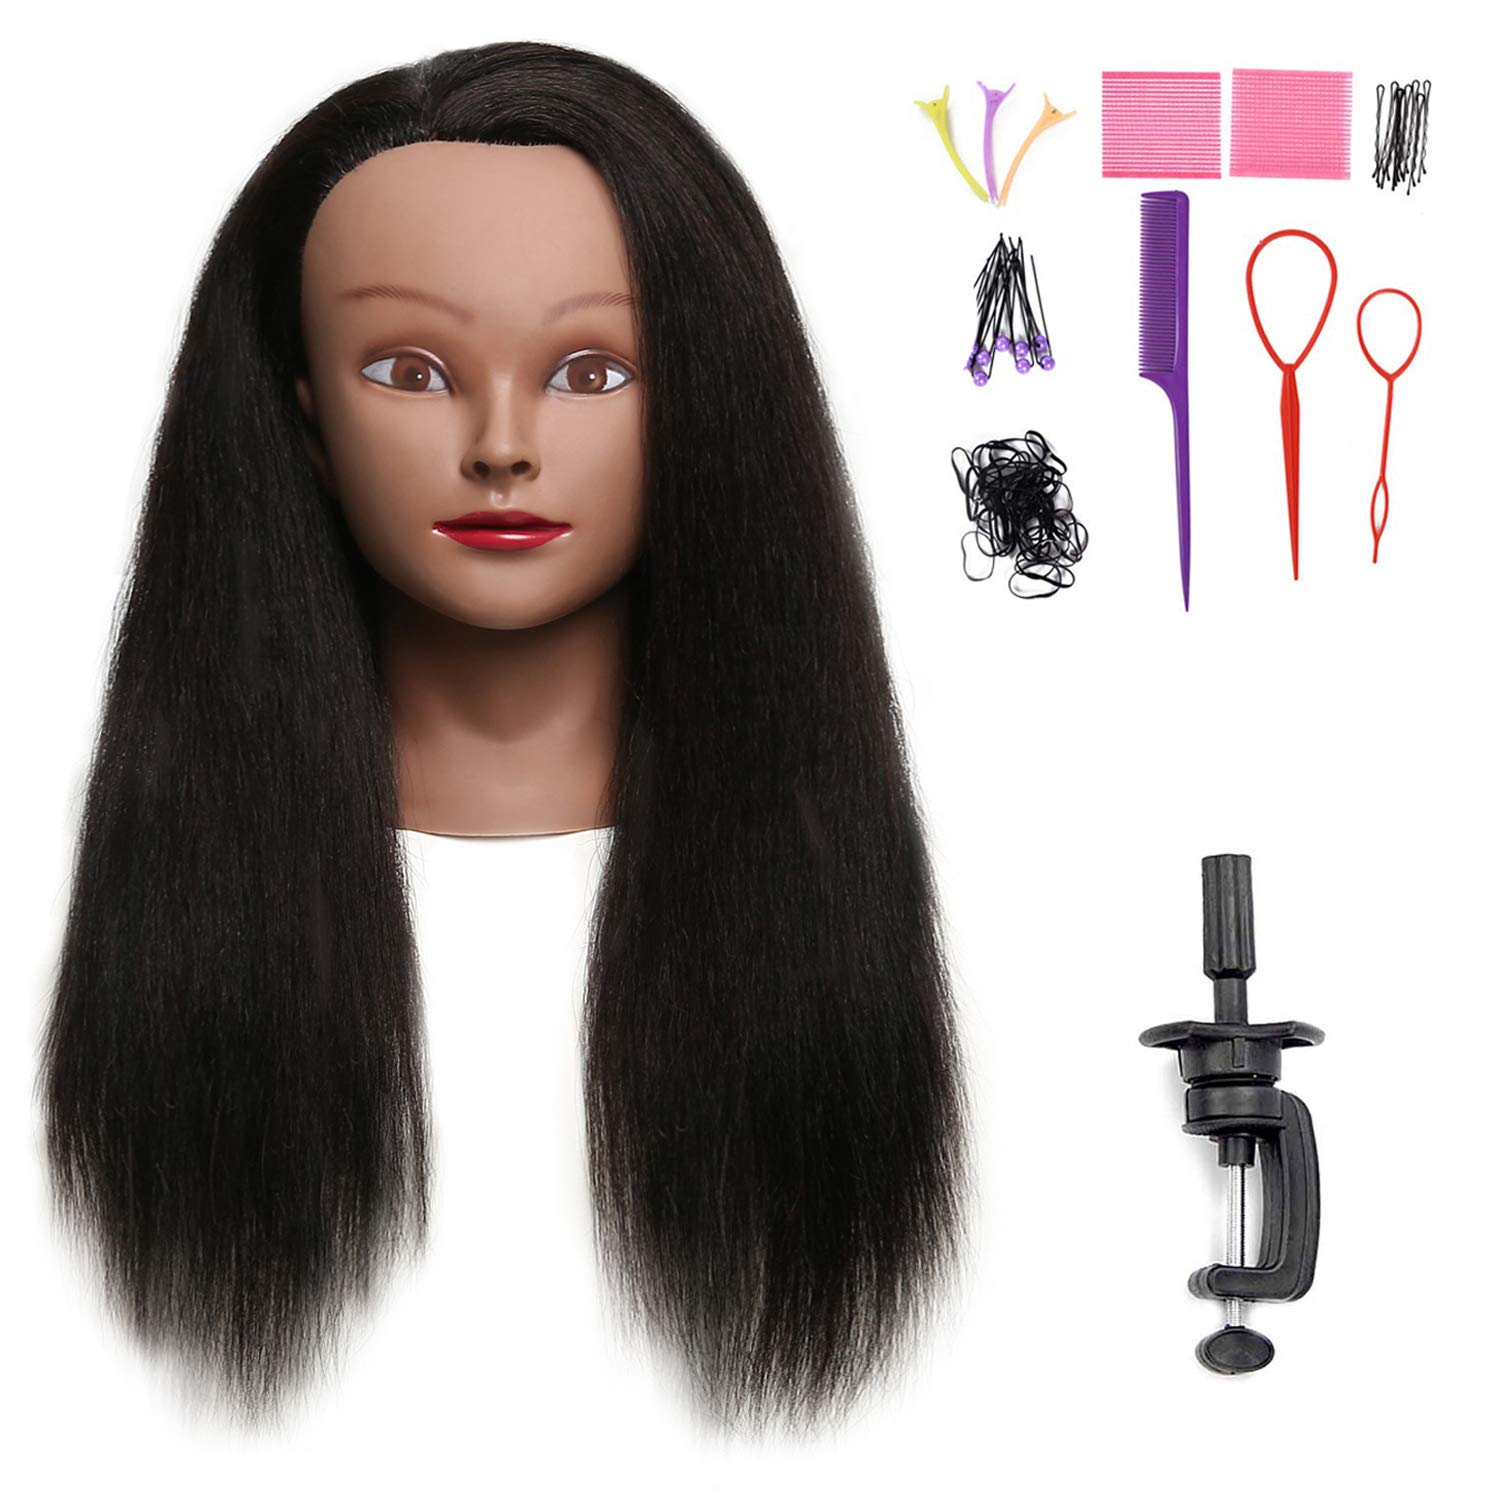 Sophire's Cosmetology Kit